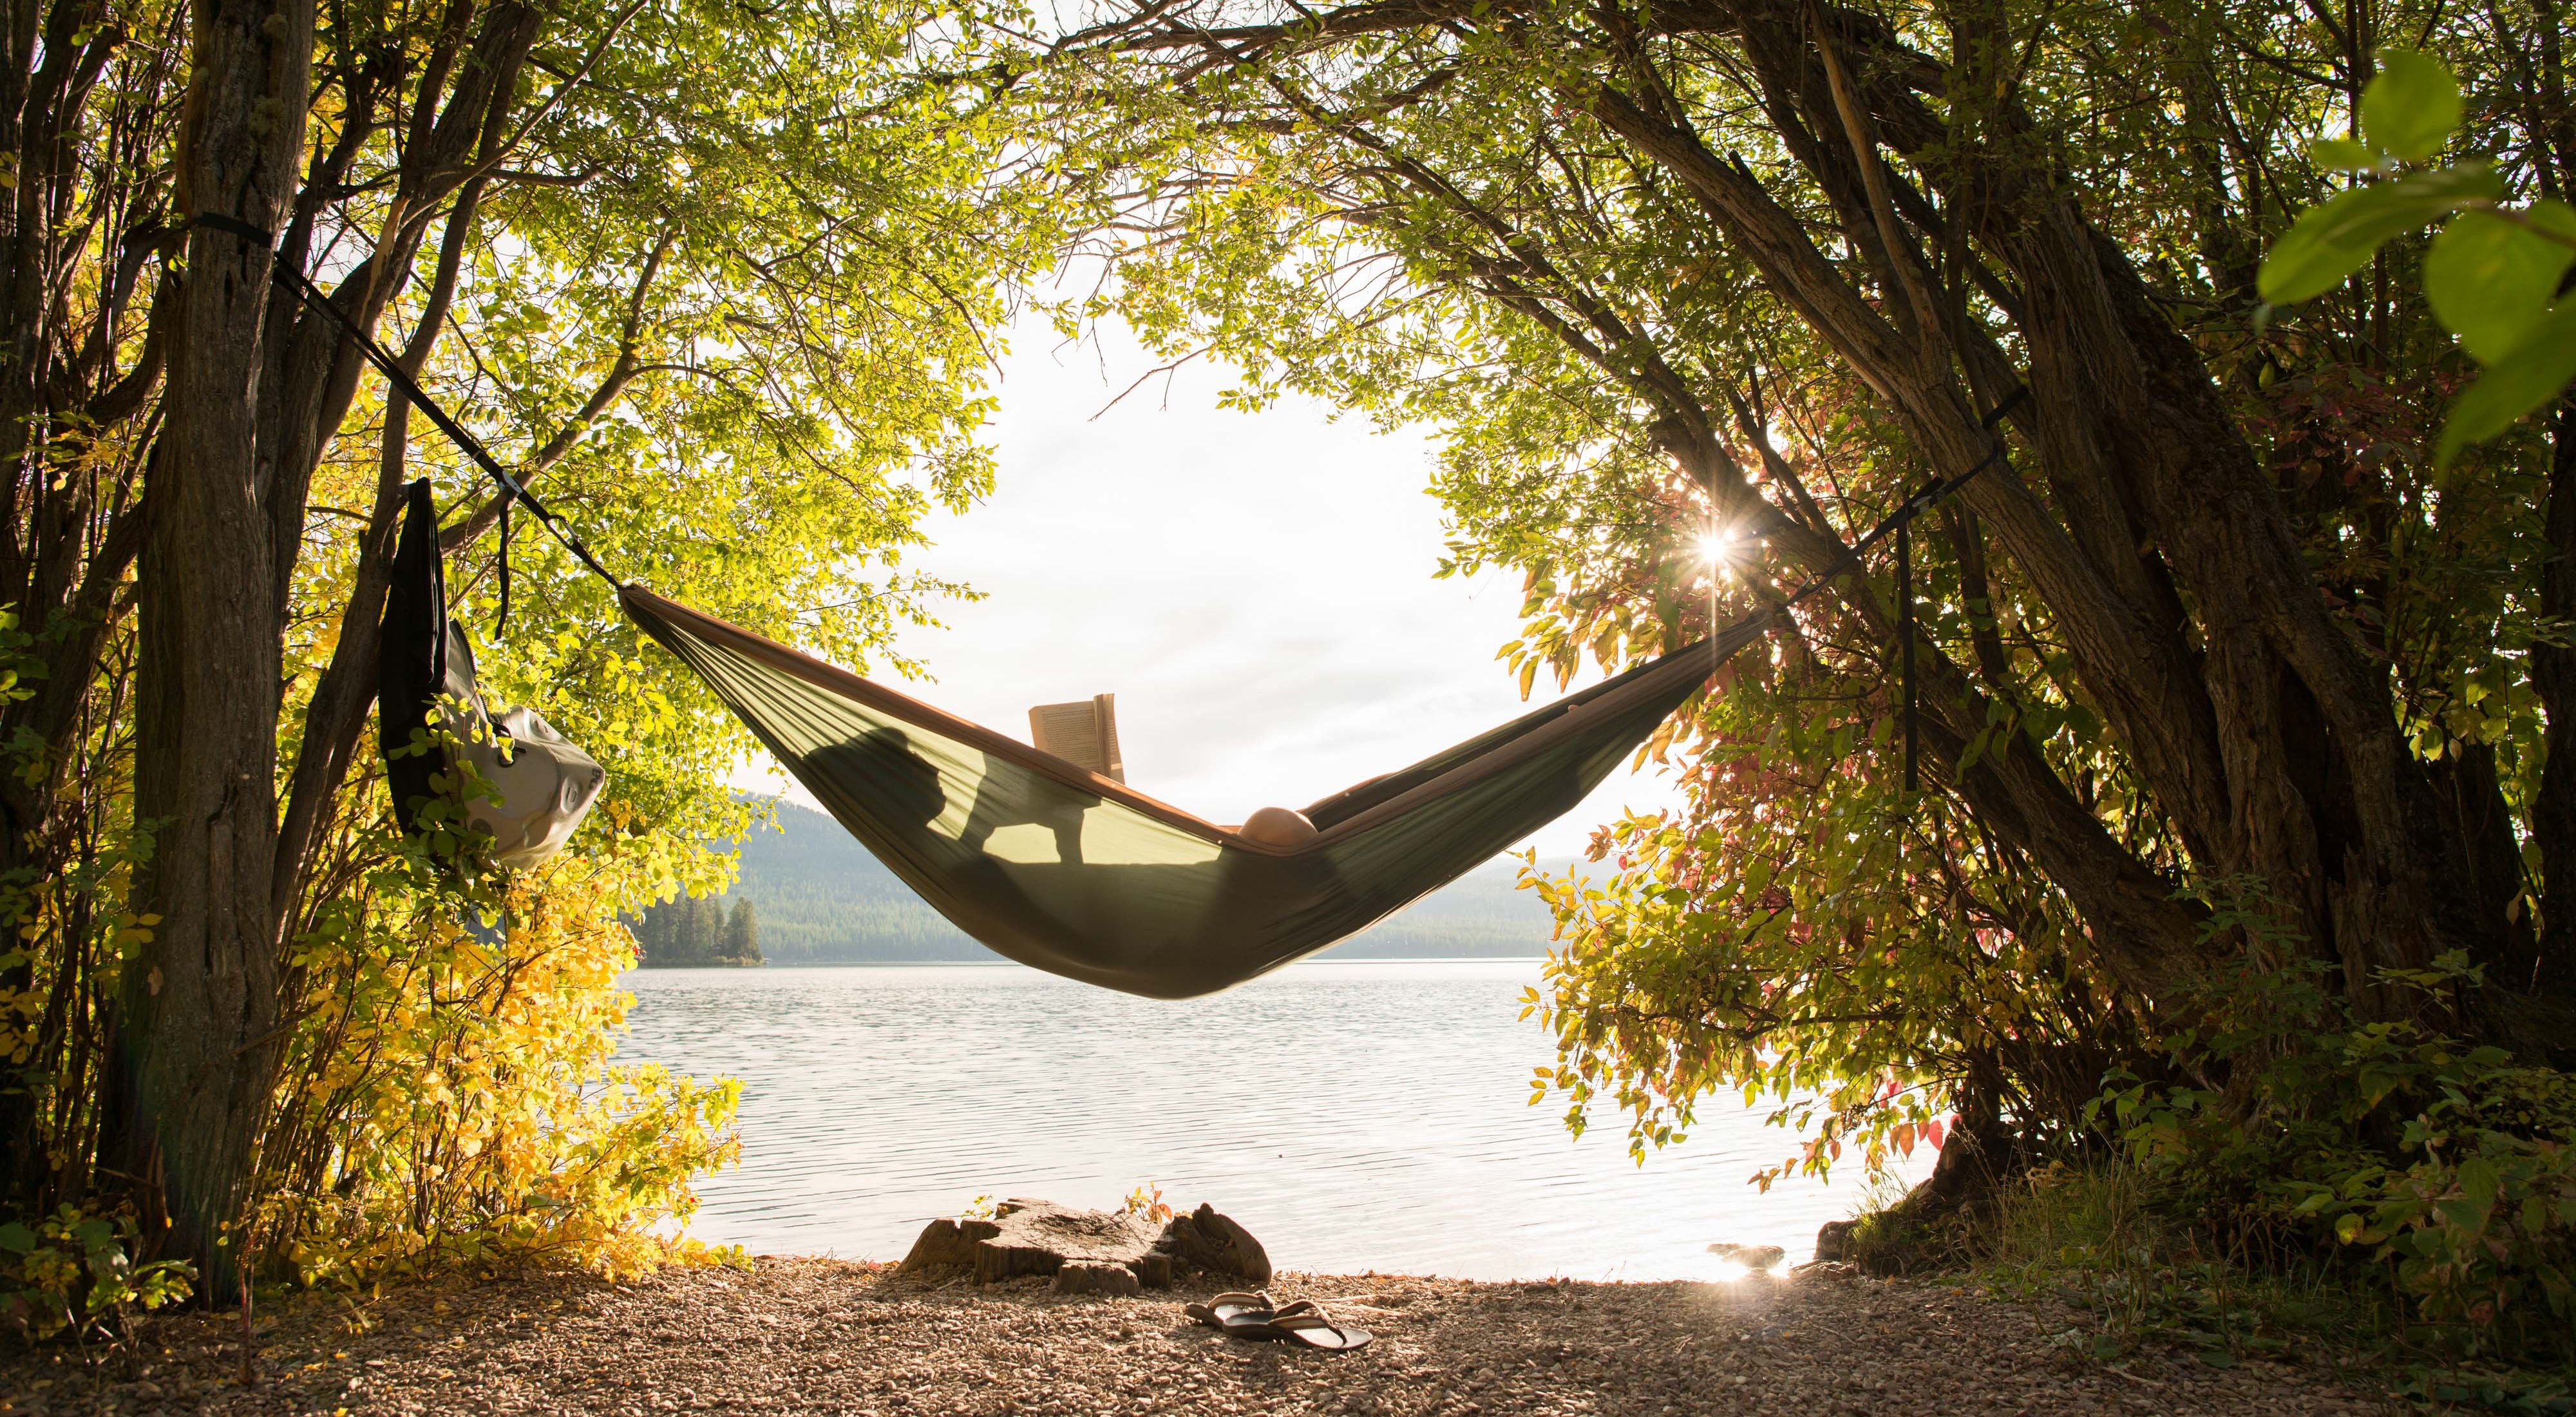 A woman reads a book while reclining in a hammock strung between two trees at the edge of a placid lake.